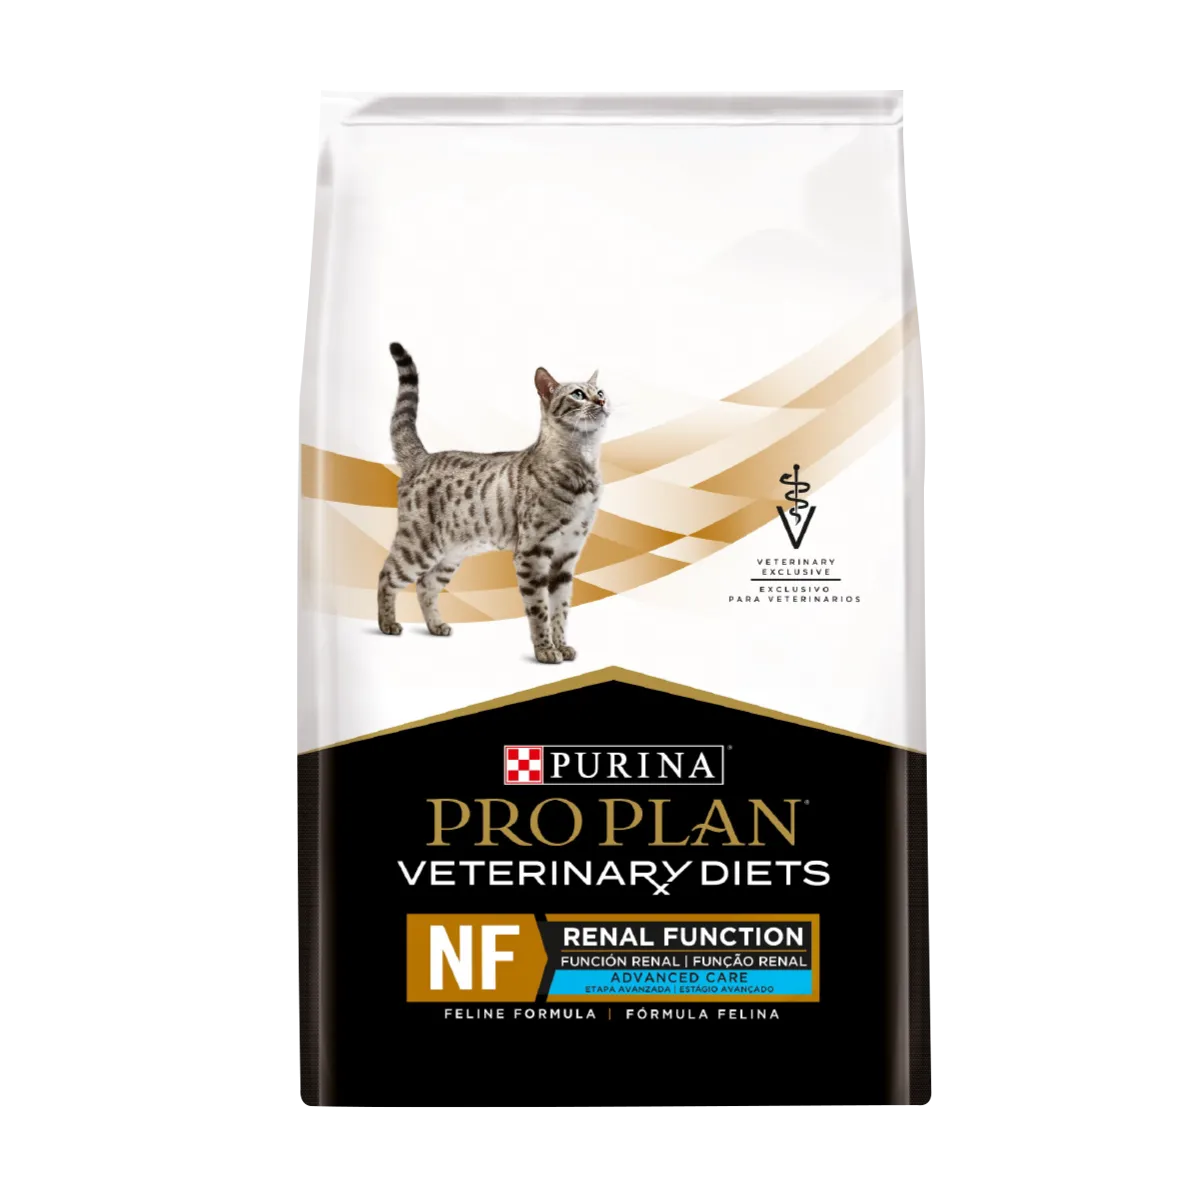 purina-pro-plan-veterinay-diets-cat-nf-renal-function-advanced-care